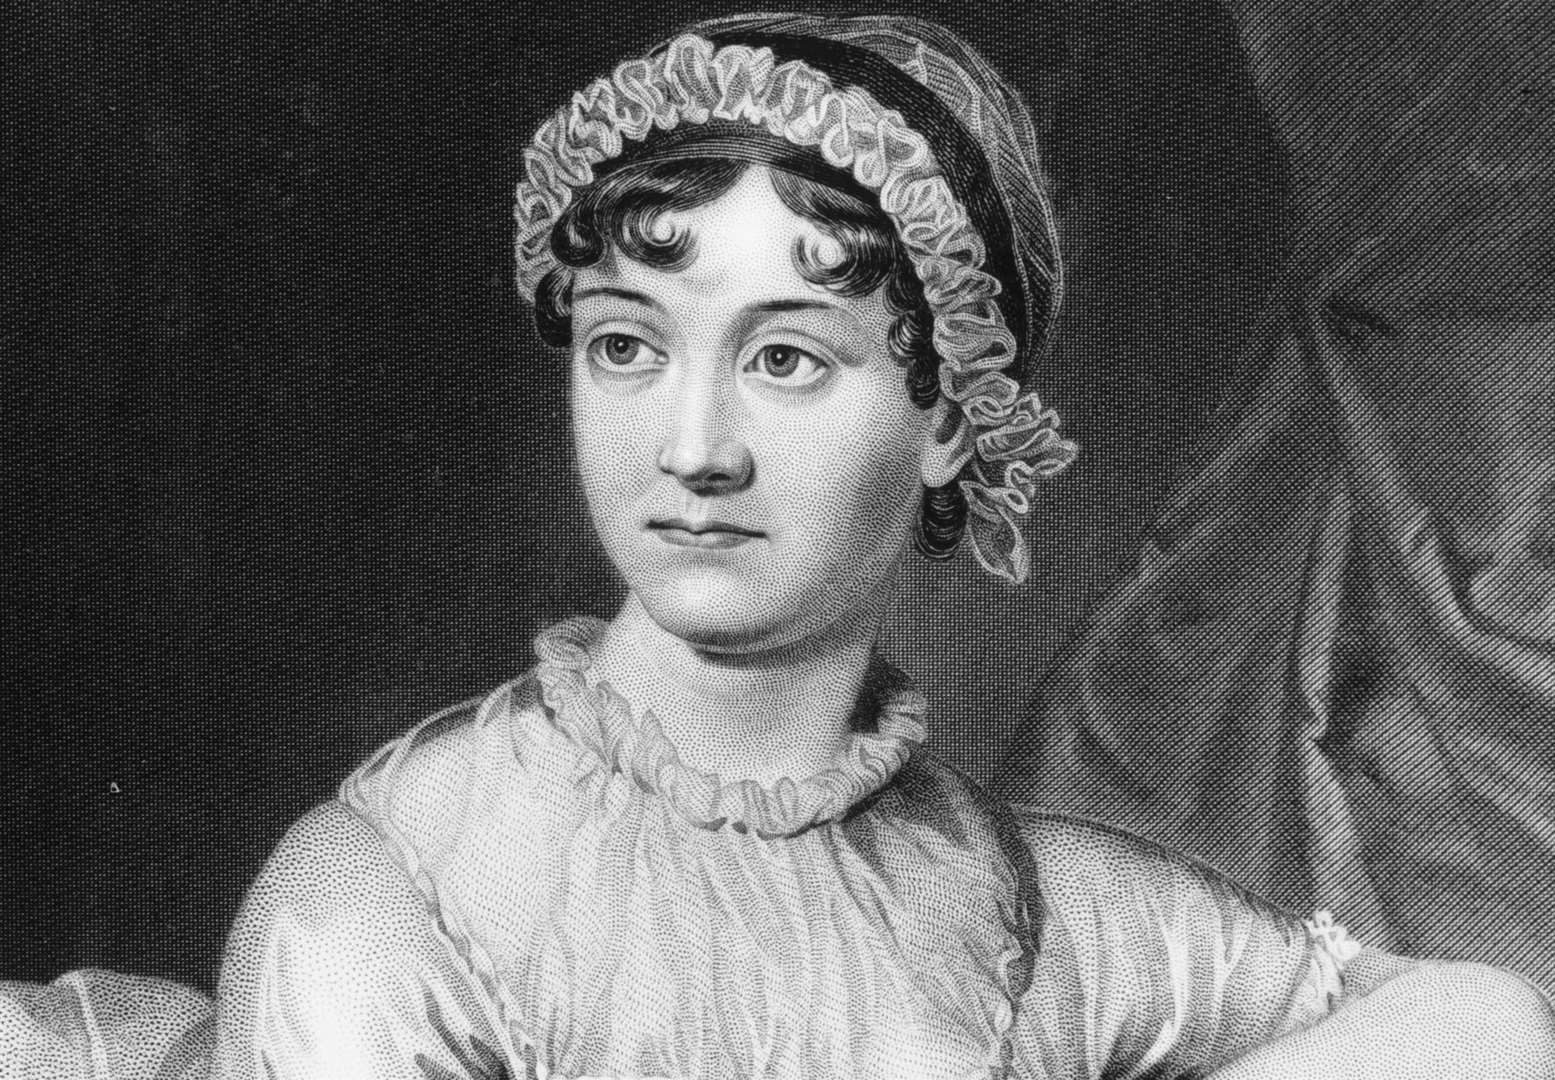 Jane Austen, born in 1775 and captured here in a family portrait, penned the likes of Pride and Prejudice and Sense and Sensibility